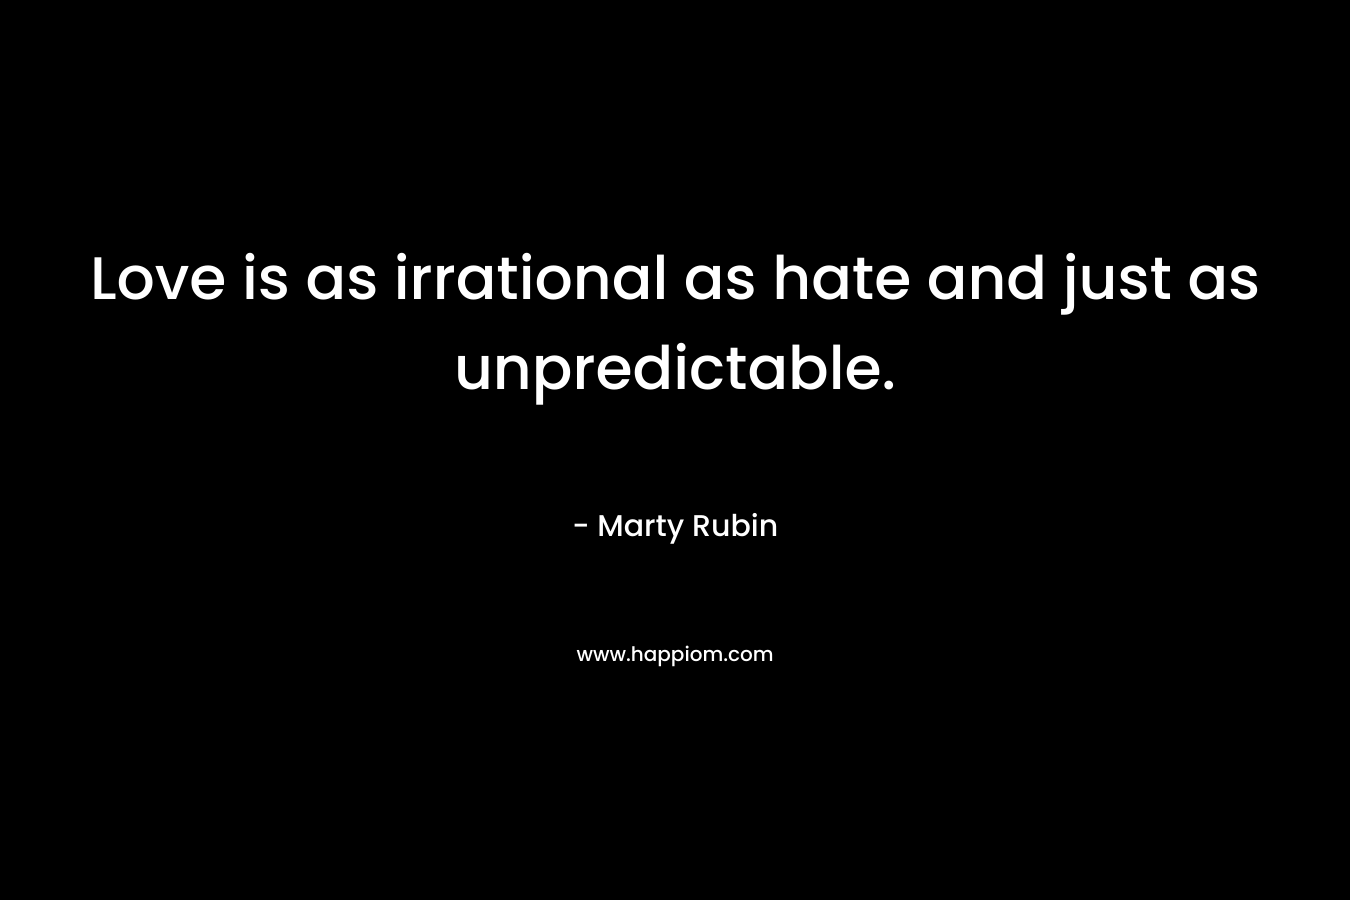 Love is as irrational as hate and just as unpredictable.